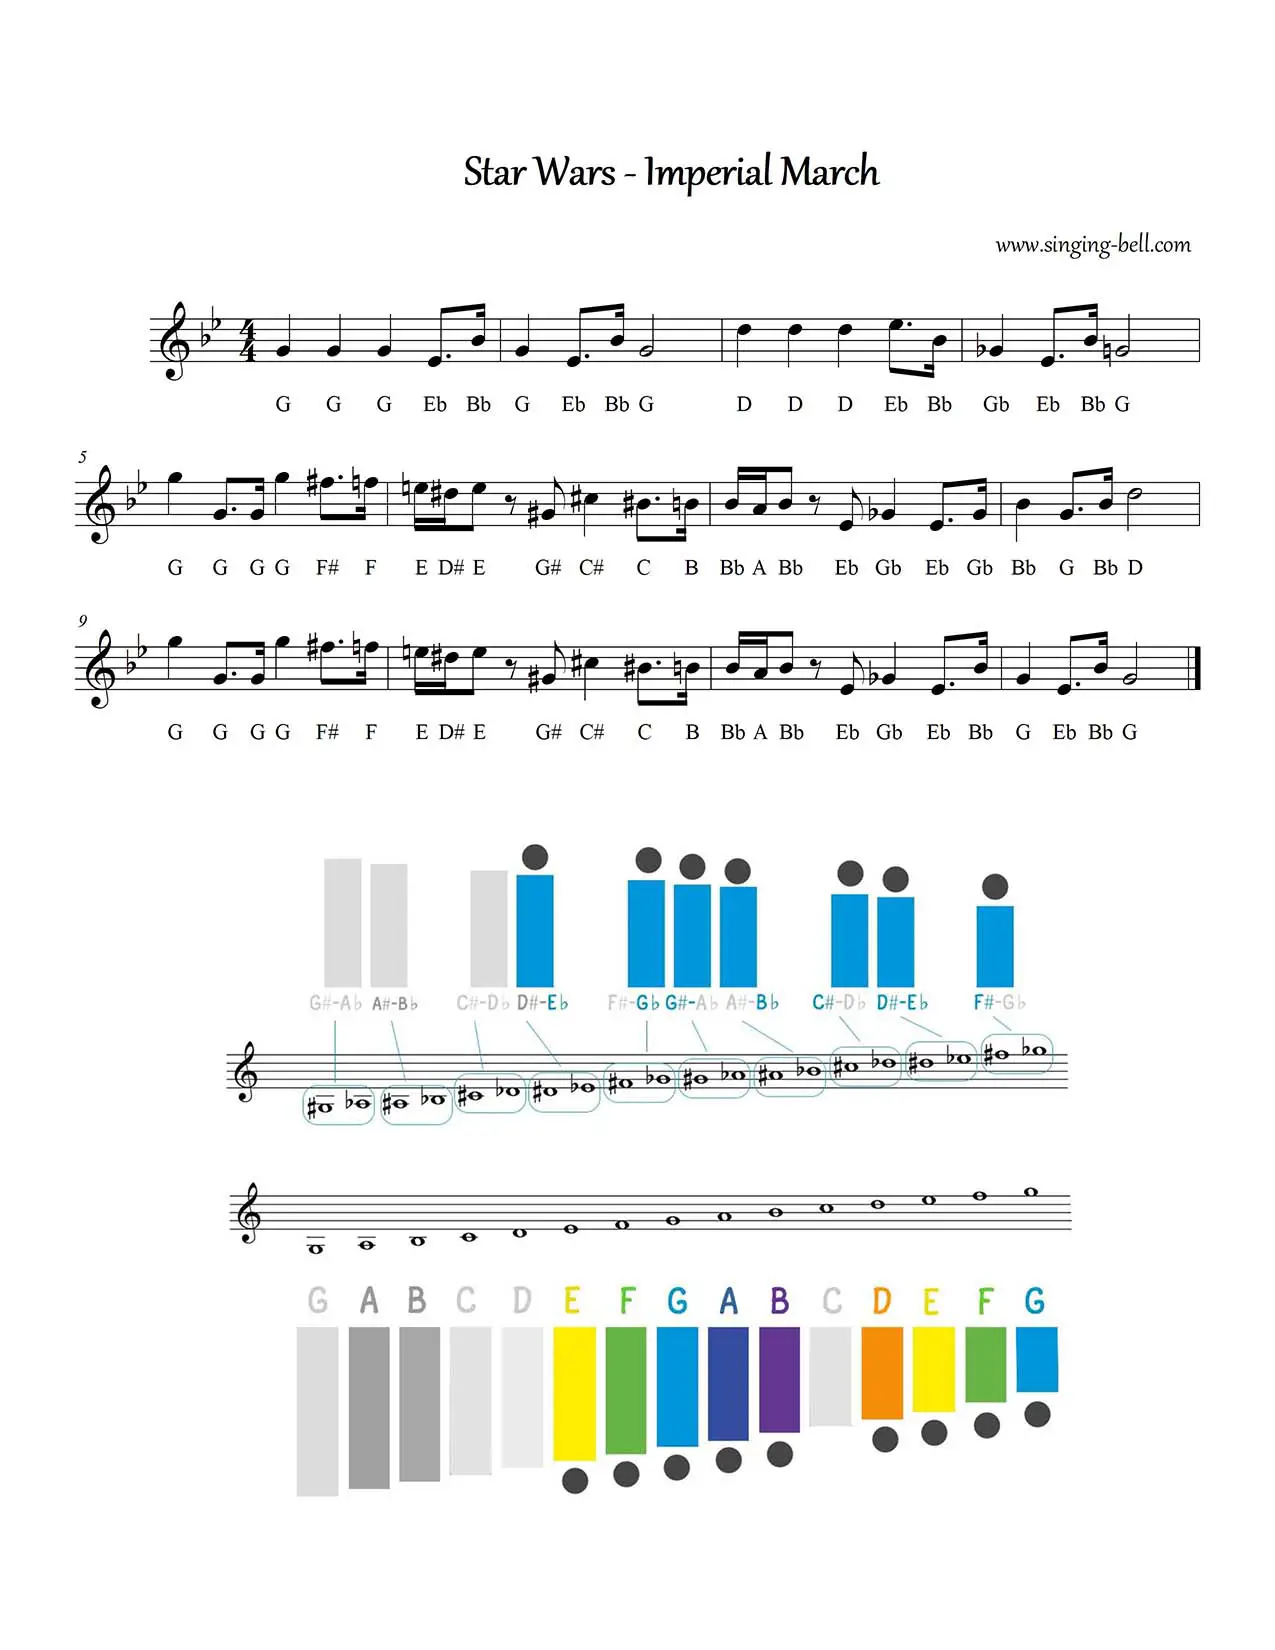 Star Wars Imperial March free xylophone glockenspiel sheet music notes chart pdf